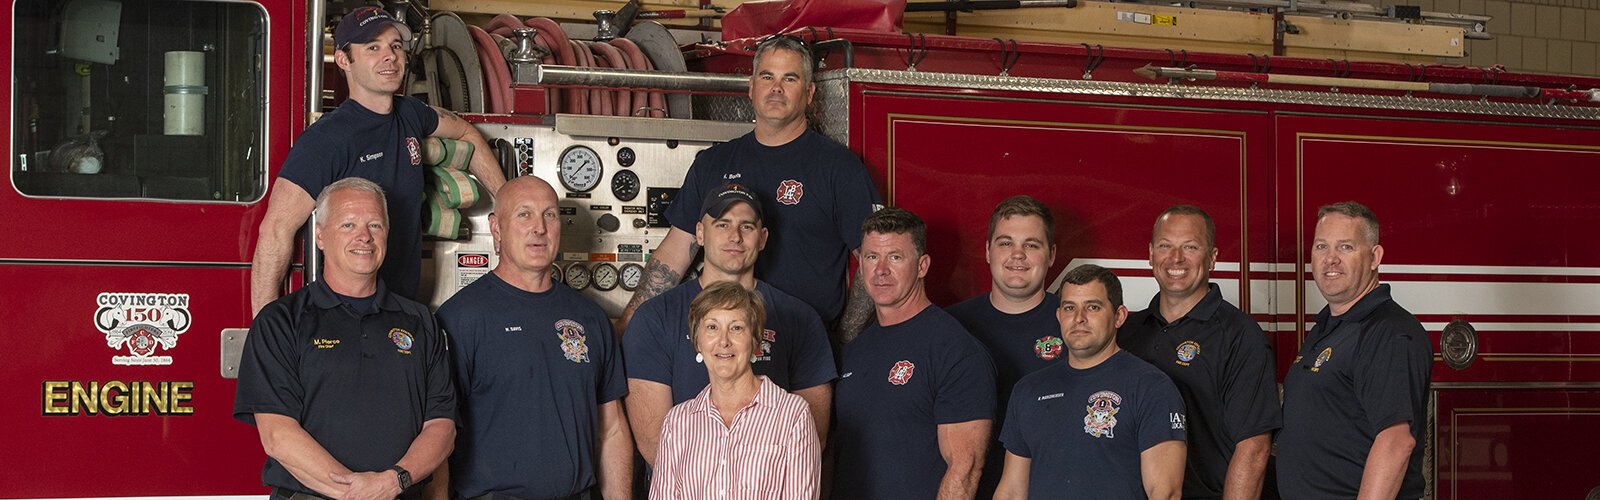 Jo Terry, center, and some of the crew of Company 1 in Covington.